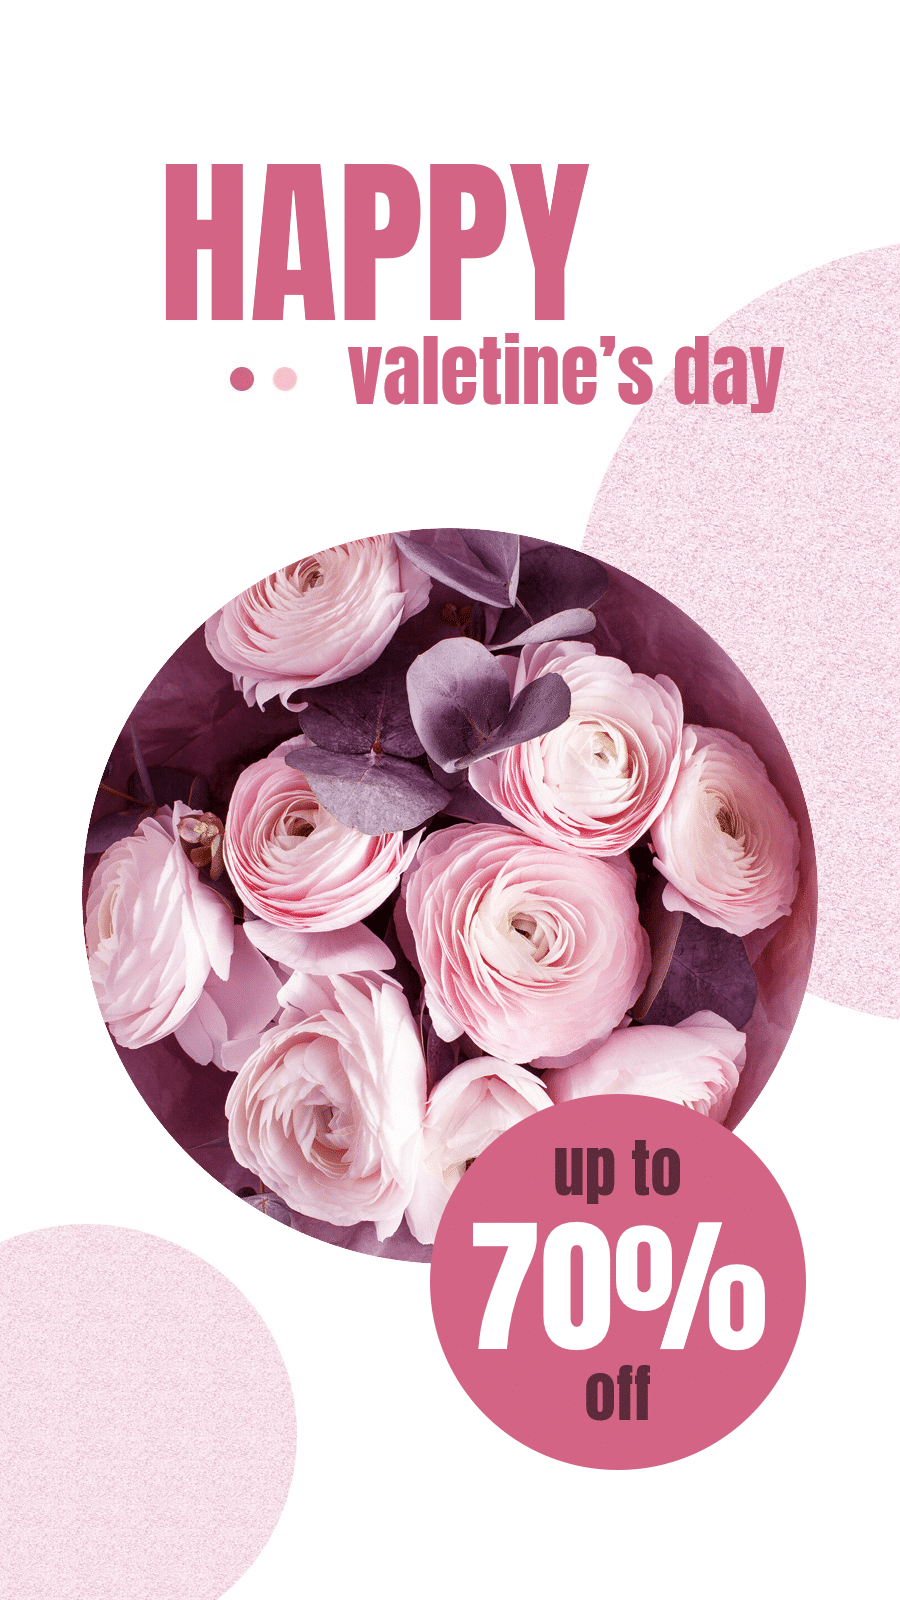 Simple Fashion Valentine's Day Flower Discount Promo Instagram Story预览效果